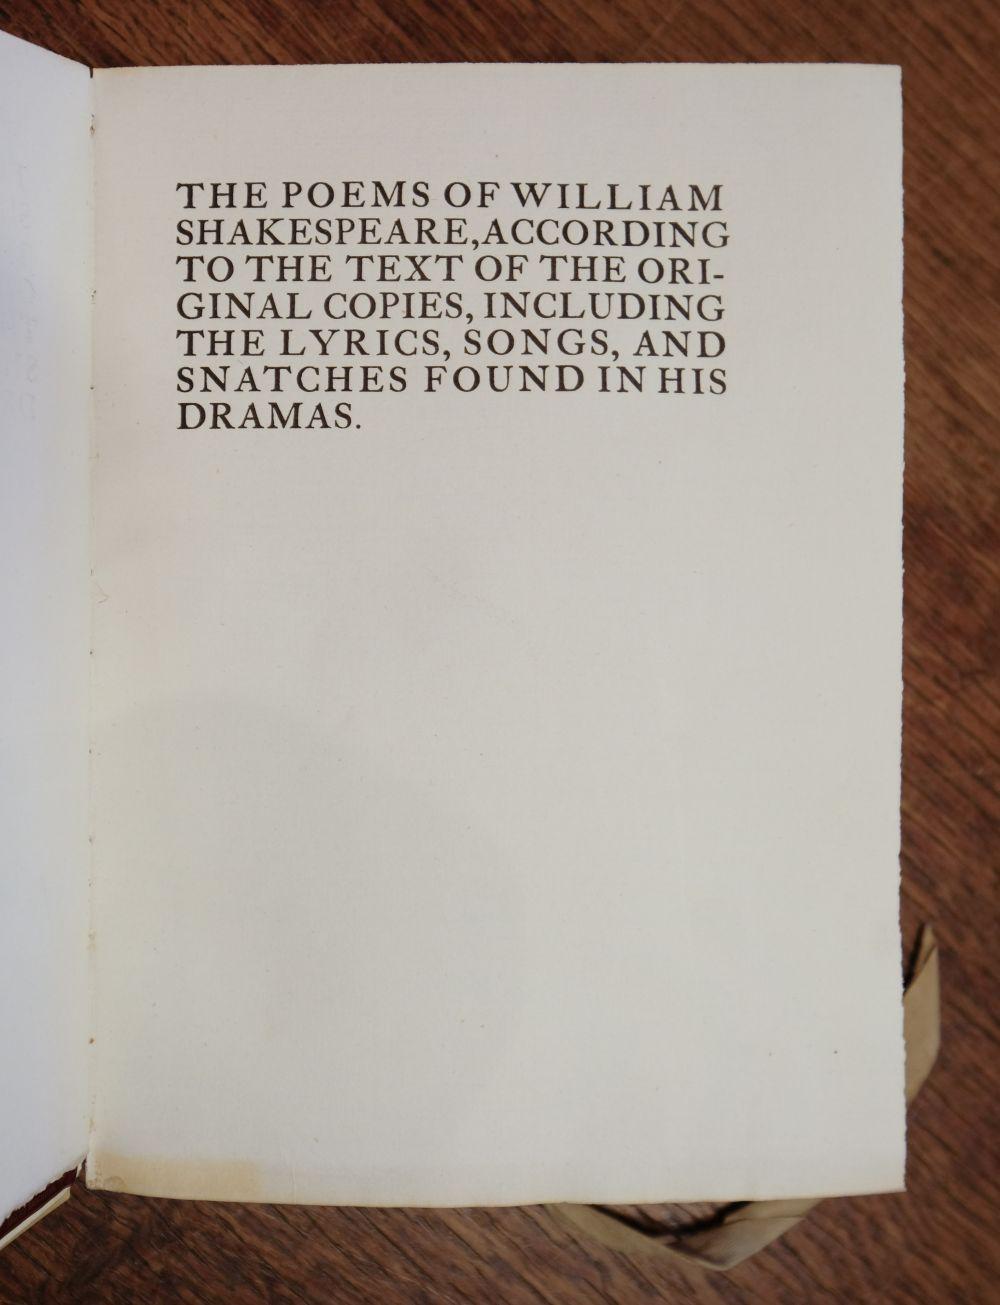 The Poems of William Shakespeare according to the text of the original copies, including the lyrics, songs, and snatches found in his dramas; according to the text of the original copies, including the lyrics, songs, and snatches found in his